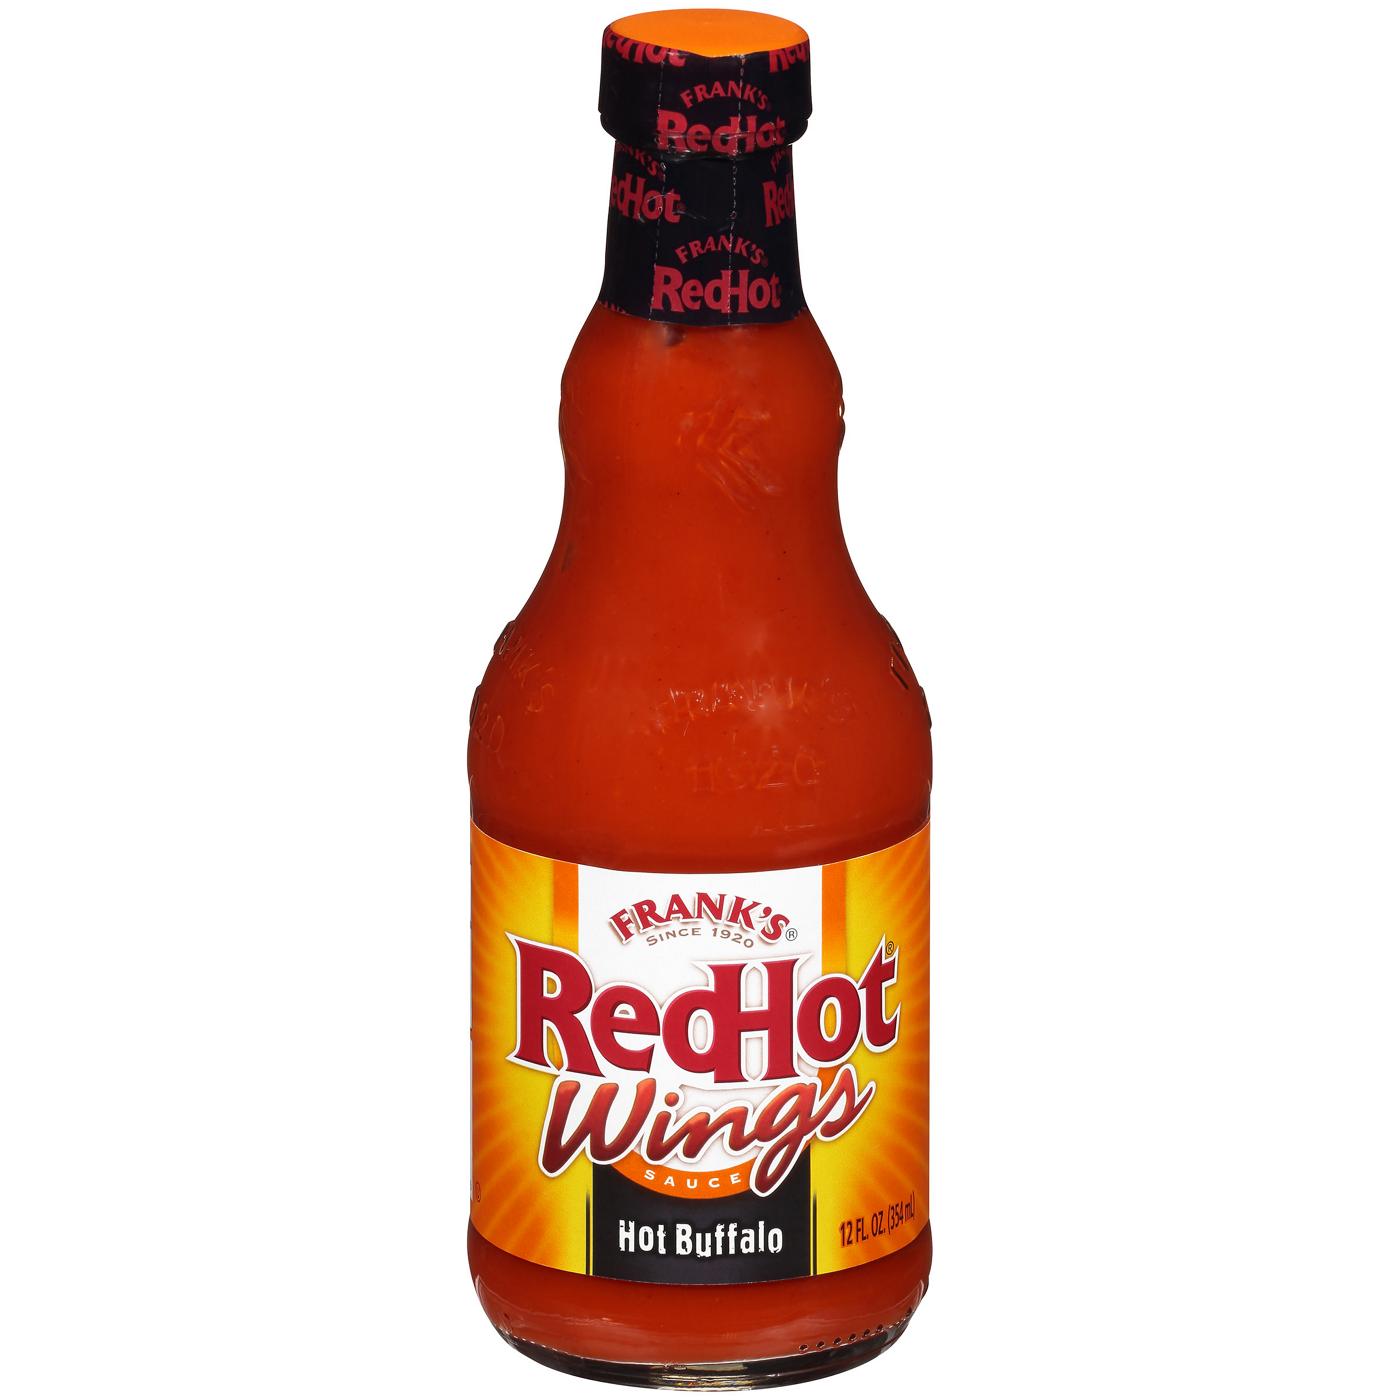 Frank's RedHot Hot Buffalo Wings Sauce; image 1 of 8